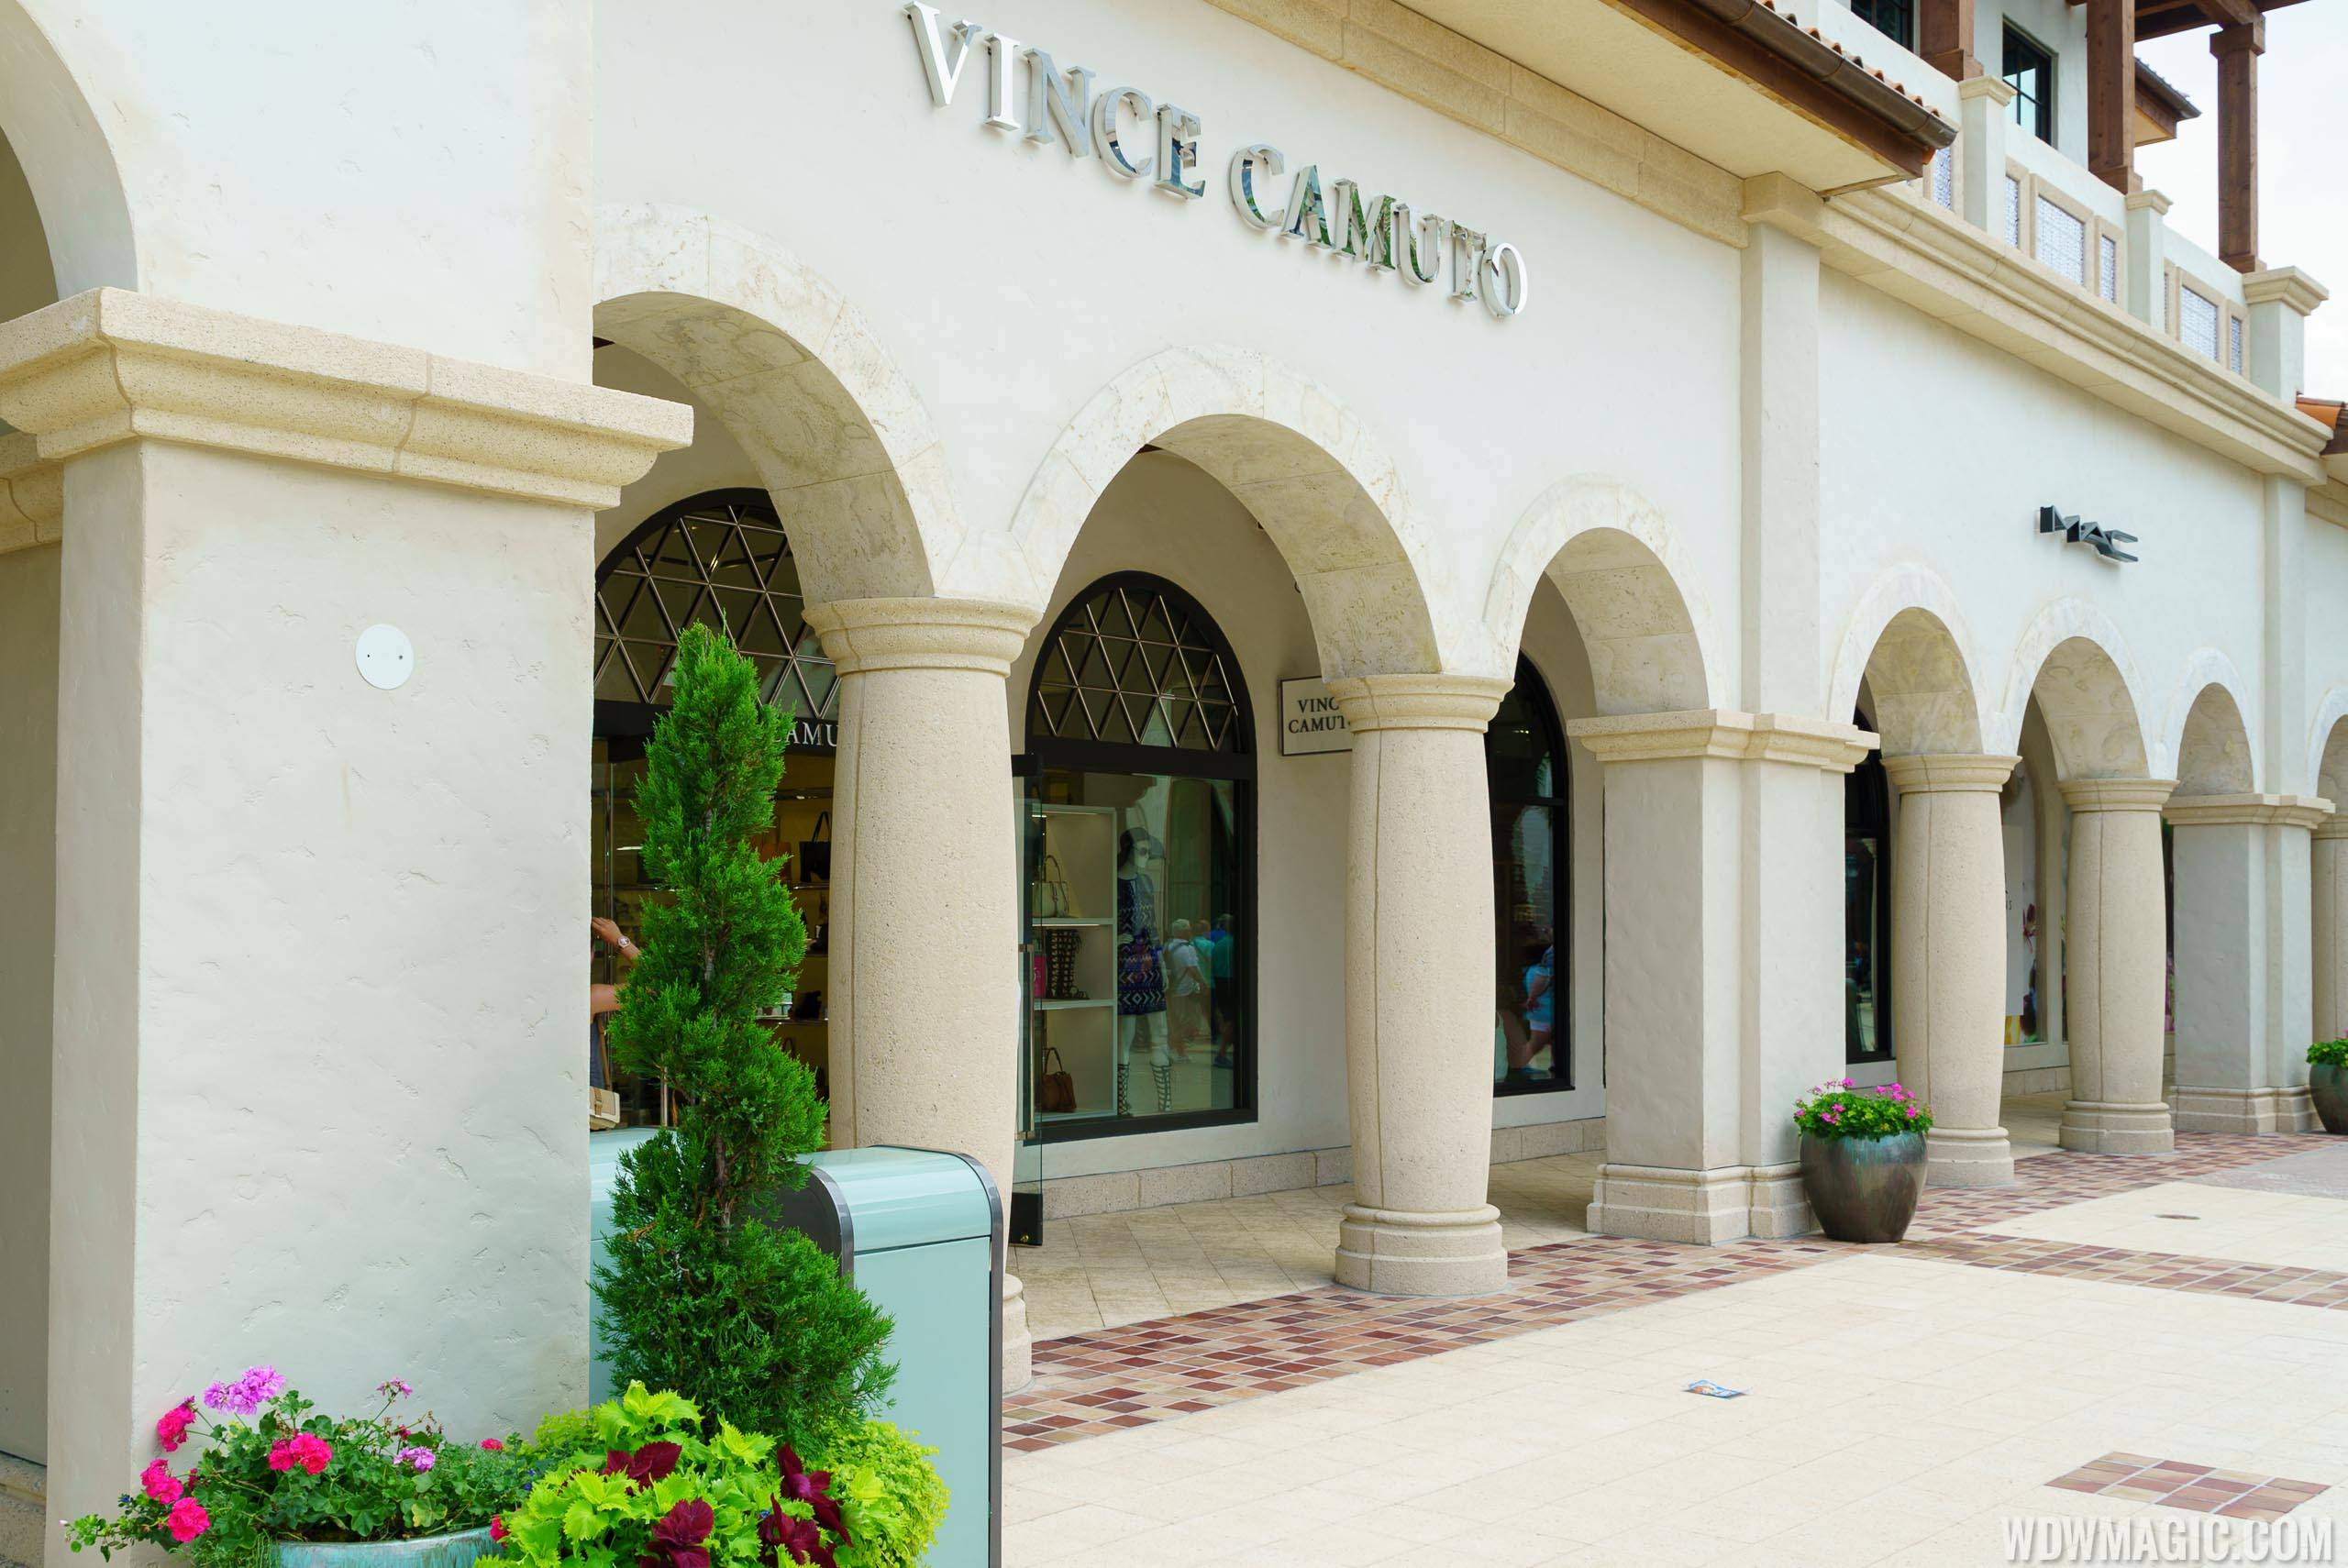 Vince Camuto at Disney Springs Town Center